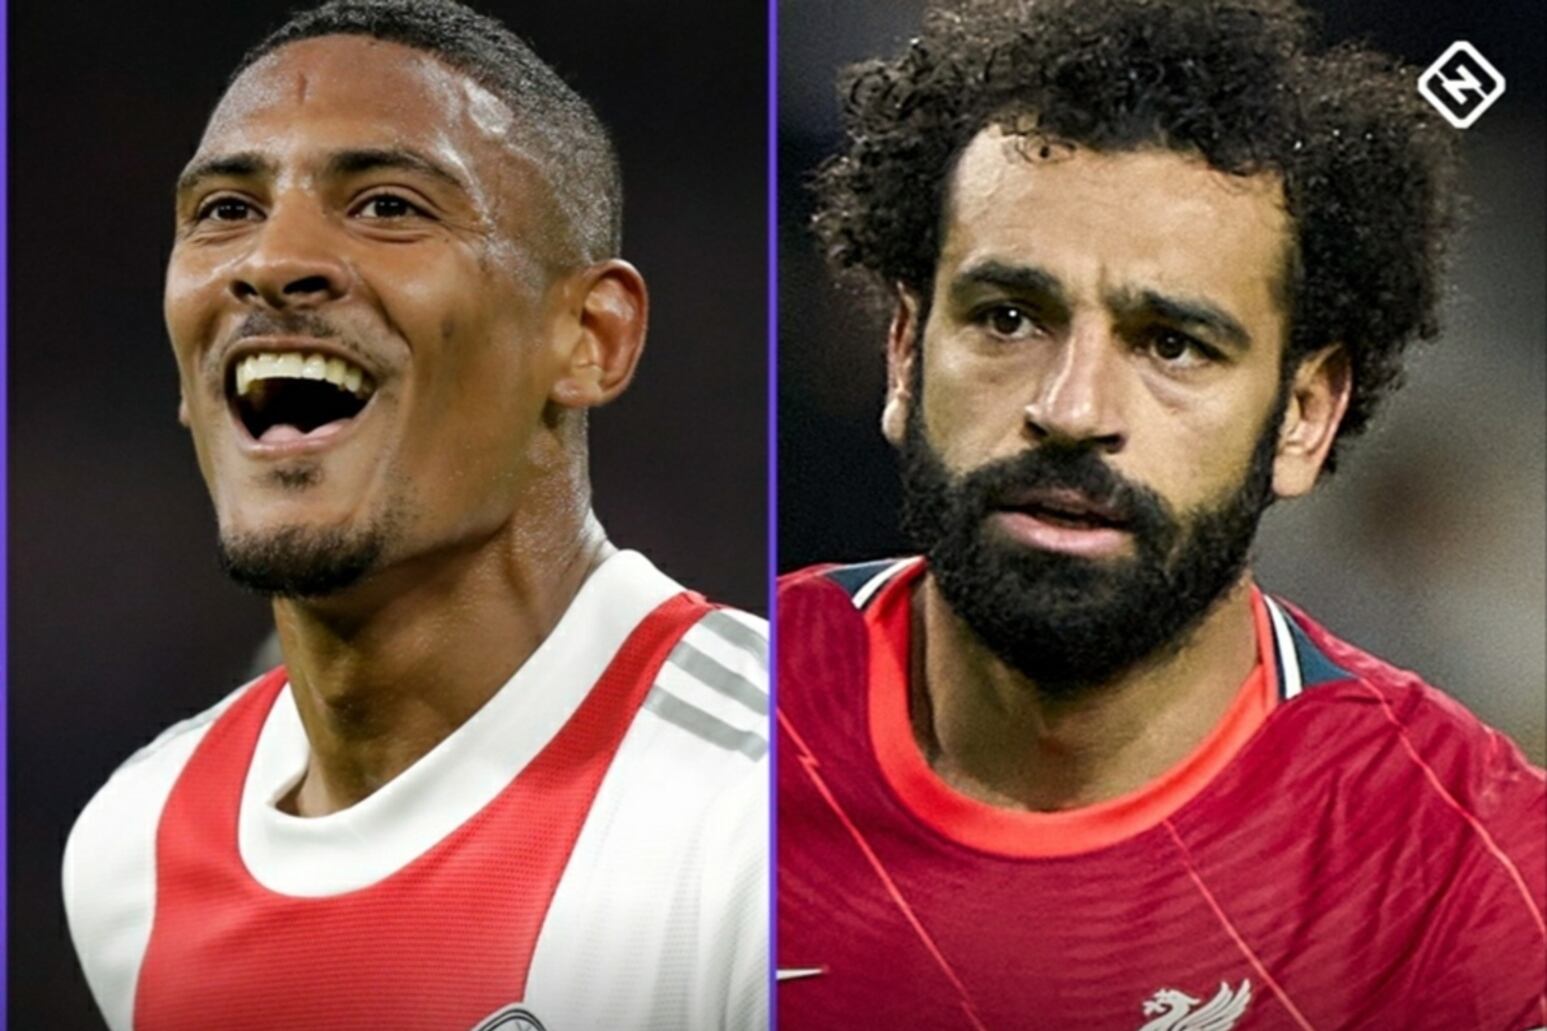 Sebastien Haller vs Mohamed Salah: who is the best African in the Champions League this season?